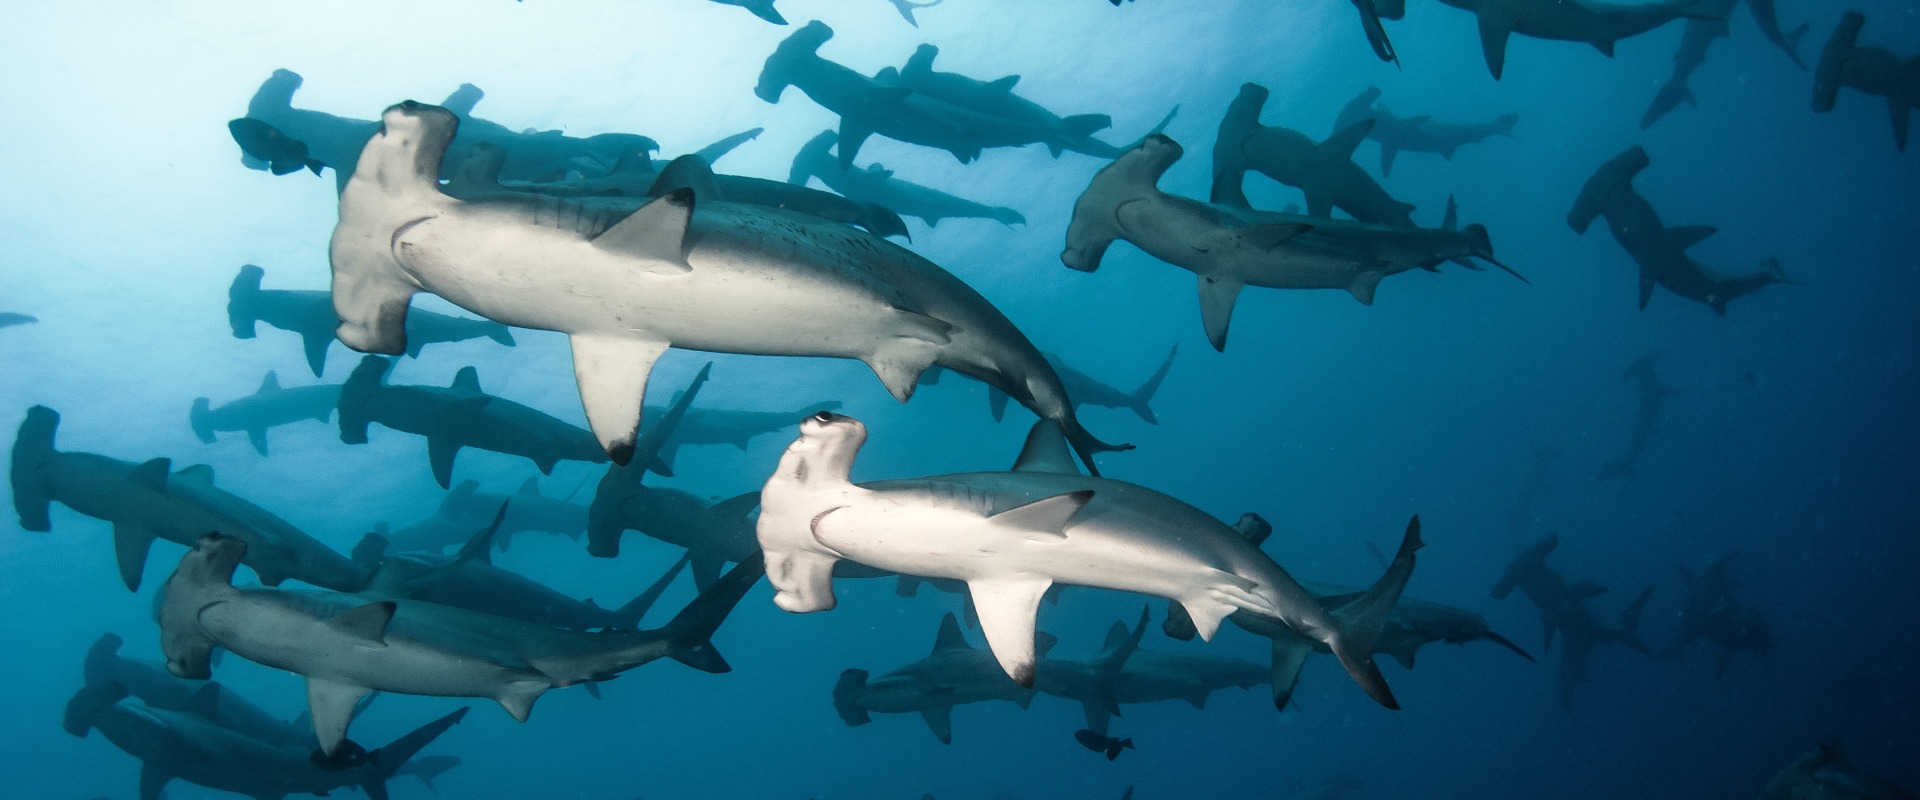 School of Scalloped Hammerheads, by Tomas Kotouc